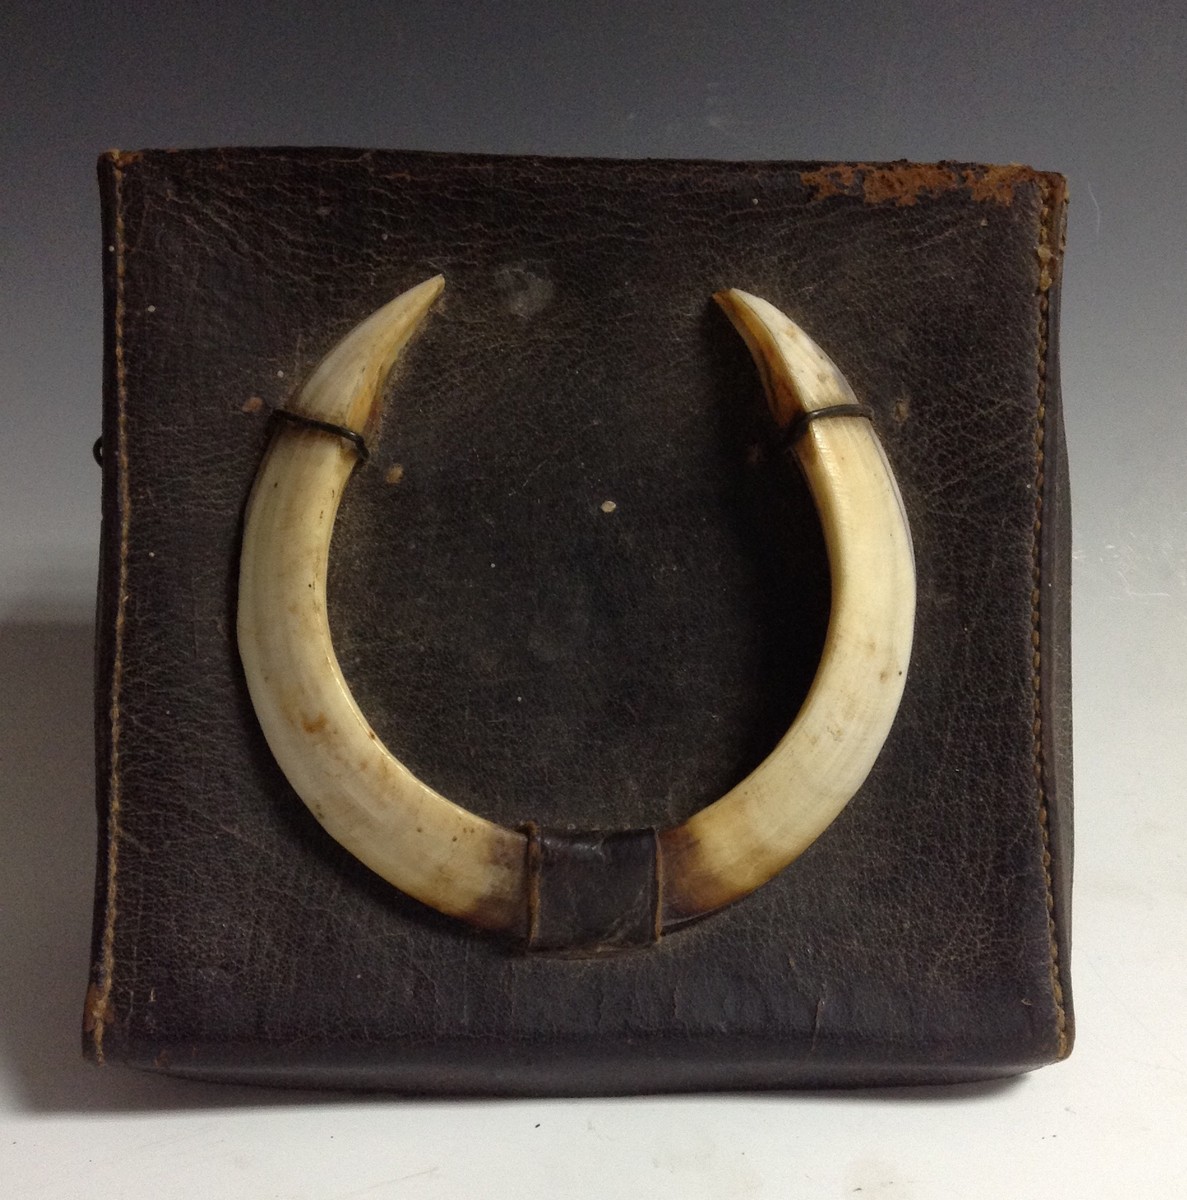 An unusual early 20th century leather box, mounted with wild boar tusks and lined with hide,